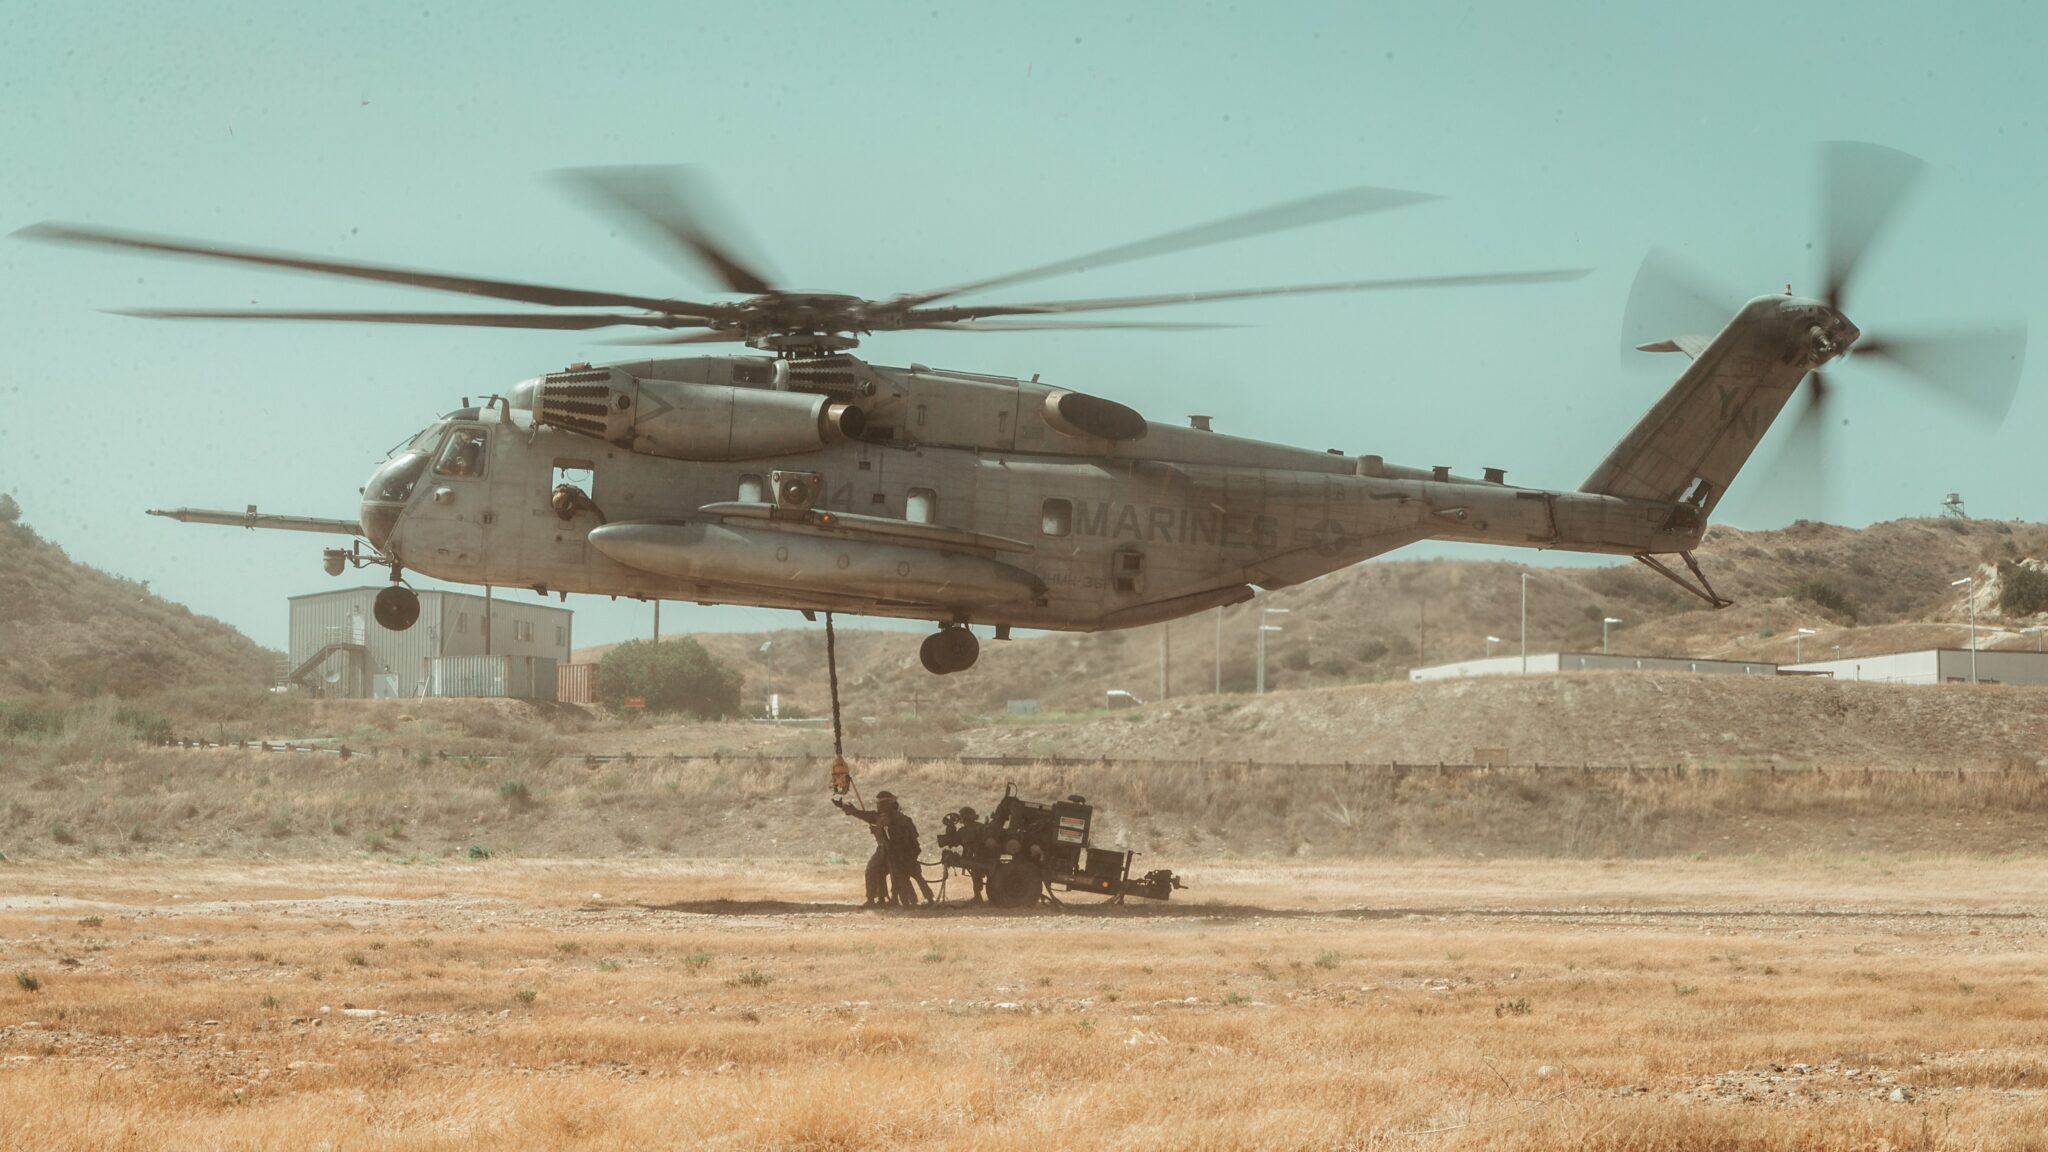 Marines loading ordinance under a hovering helicopter in an open field at a Marine Base